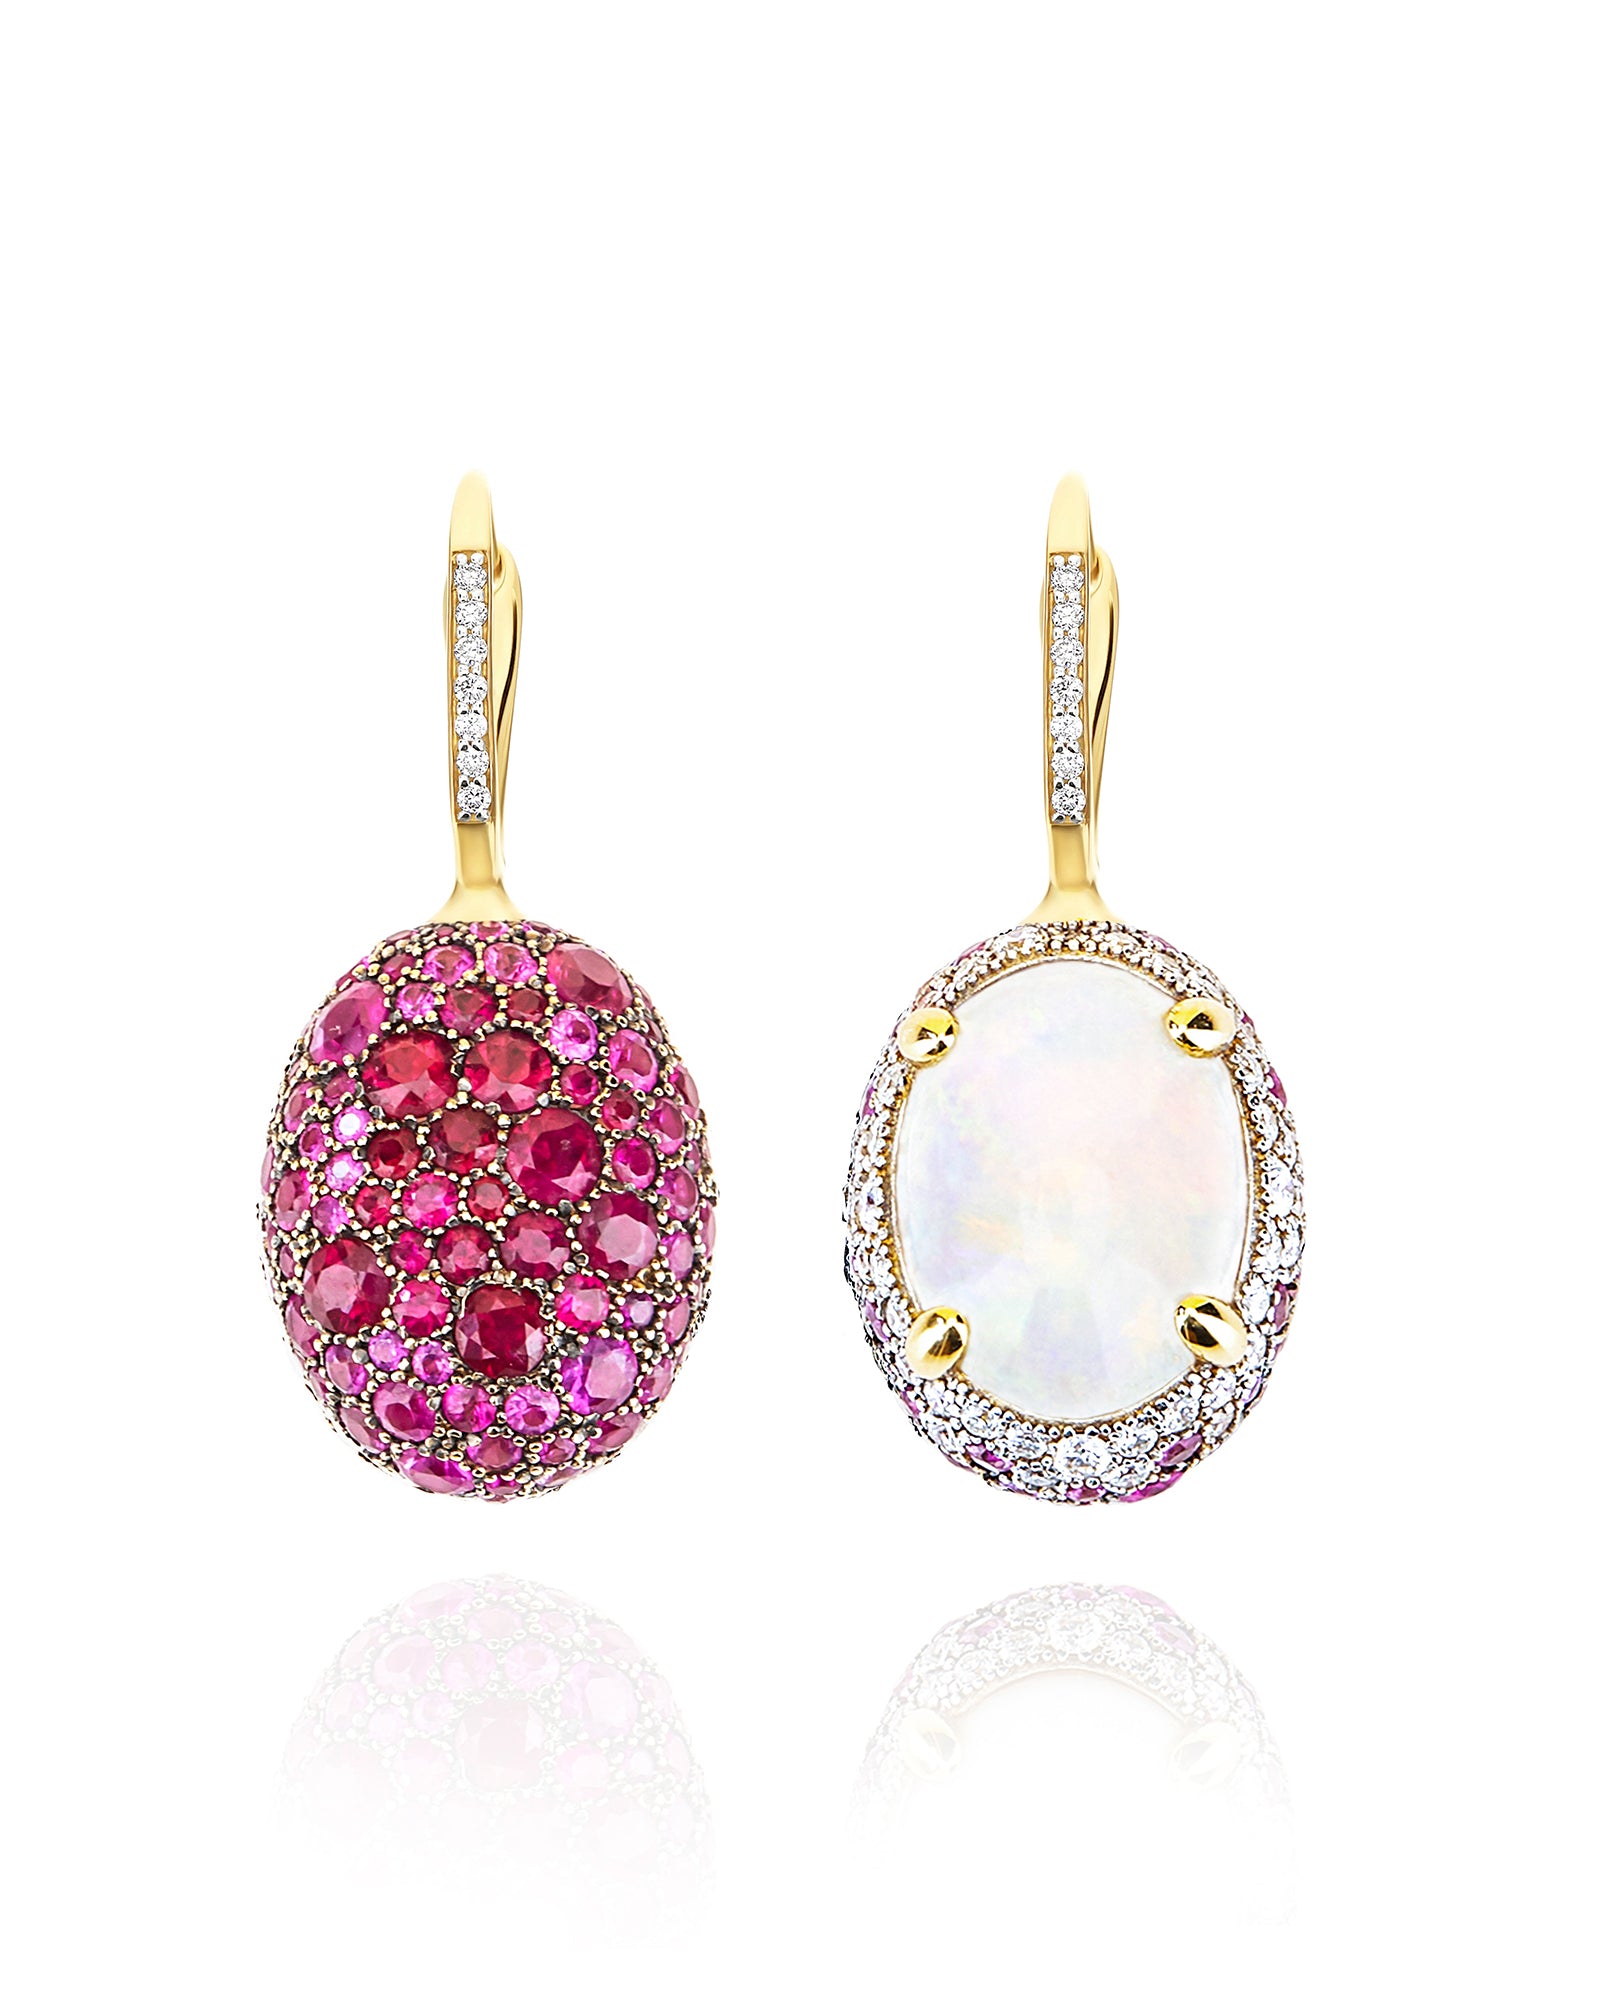 "Reverse" Ciliegine Gold, Pink Sapphires, Rubies, White Australian Opal and Diamonds Double-face Ball Drop Earrings (LARGE)